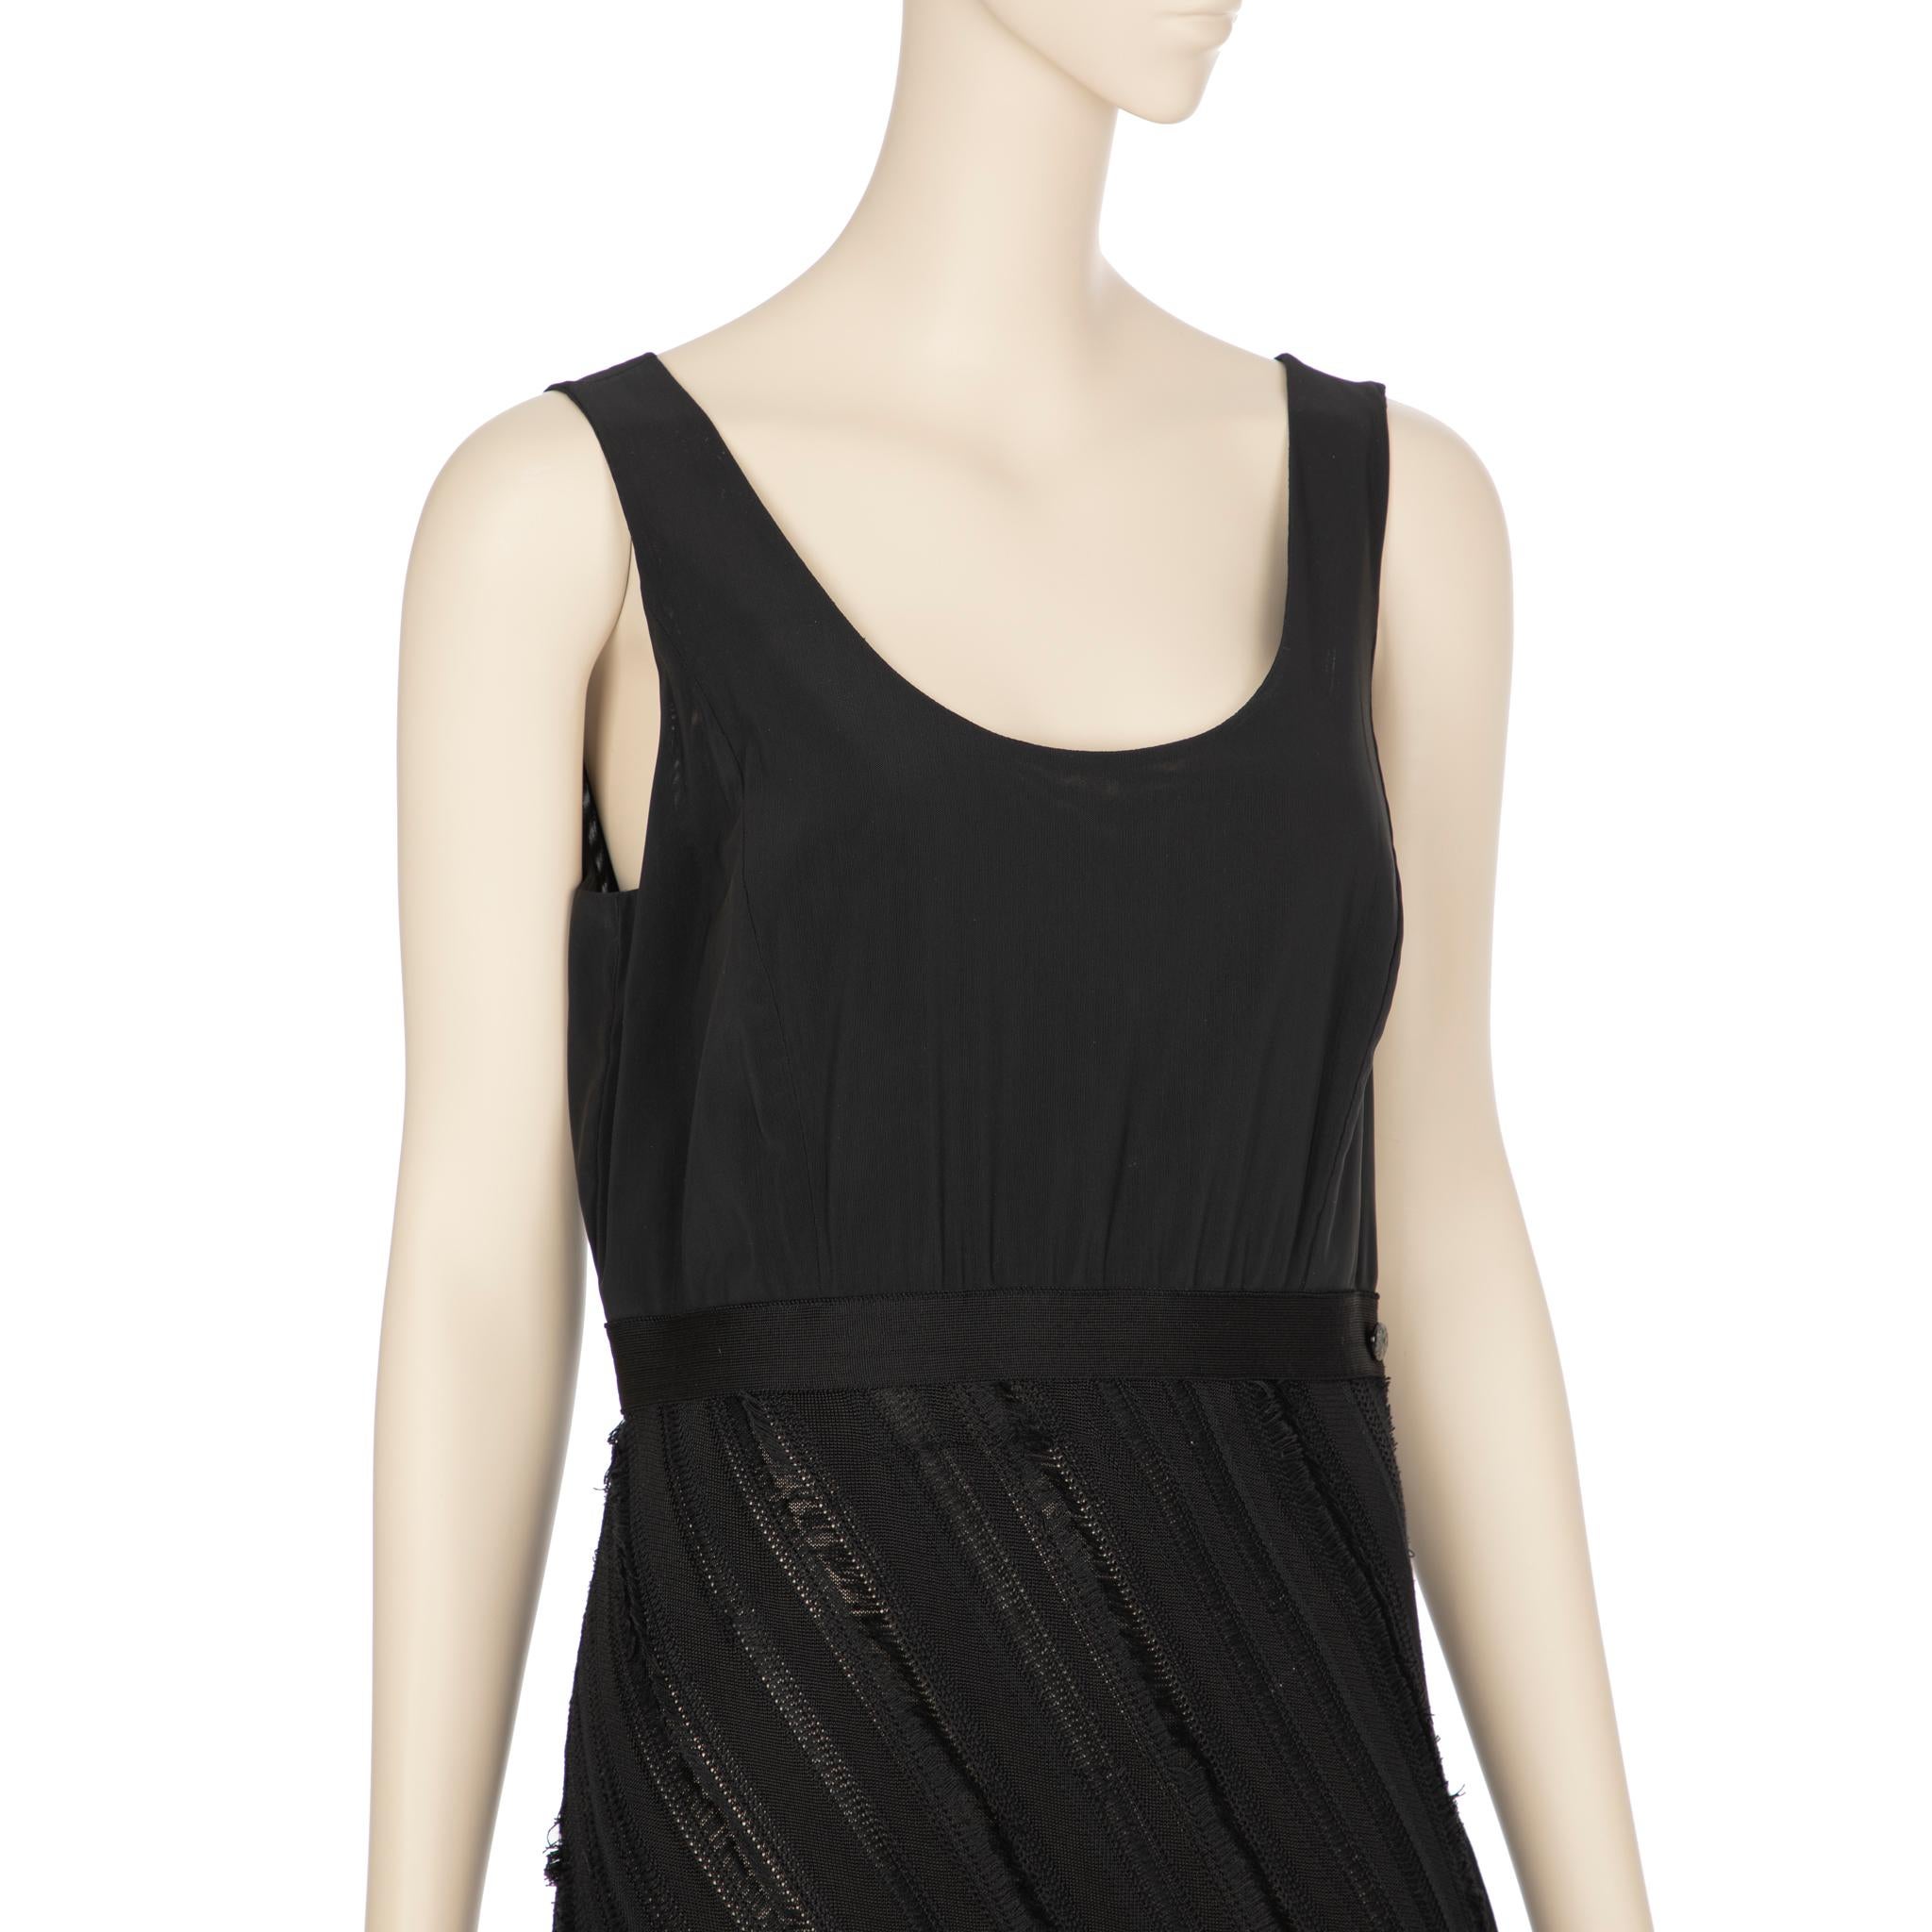 Chanel Black Shift Dress 42 FR In Excellent Condition For Sale In DOUBLE BAY, NSW